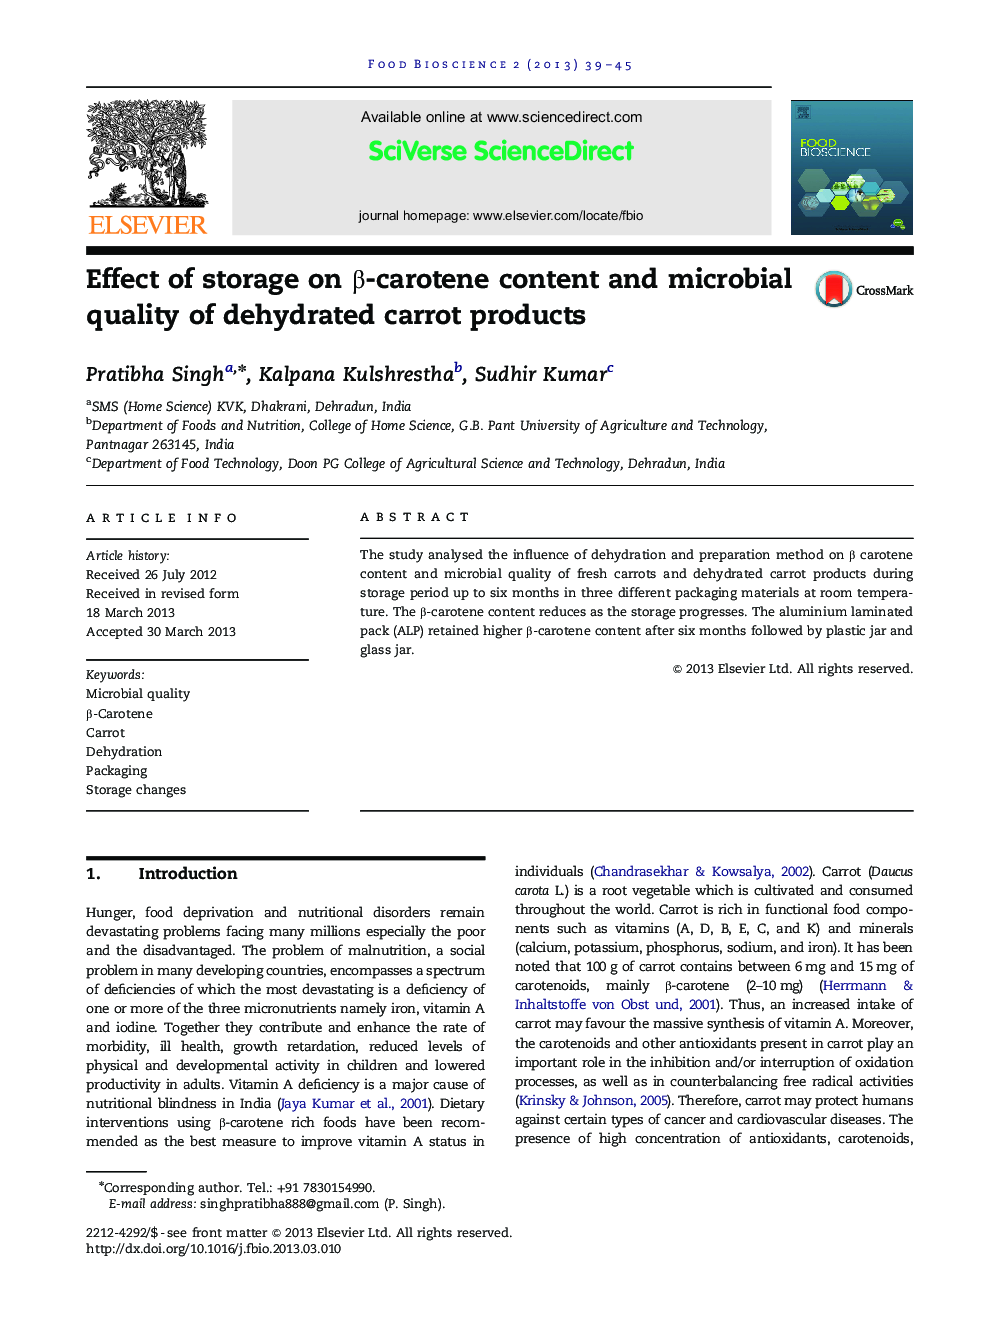 Effect of storage on β-carotene content and microbial quality of dehydrated carrot products